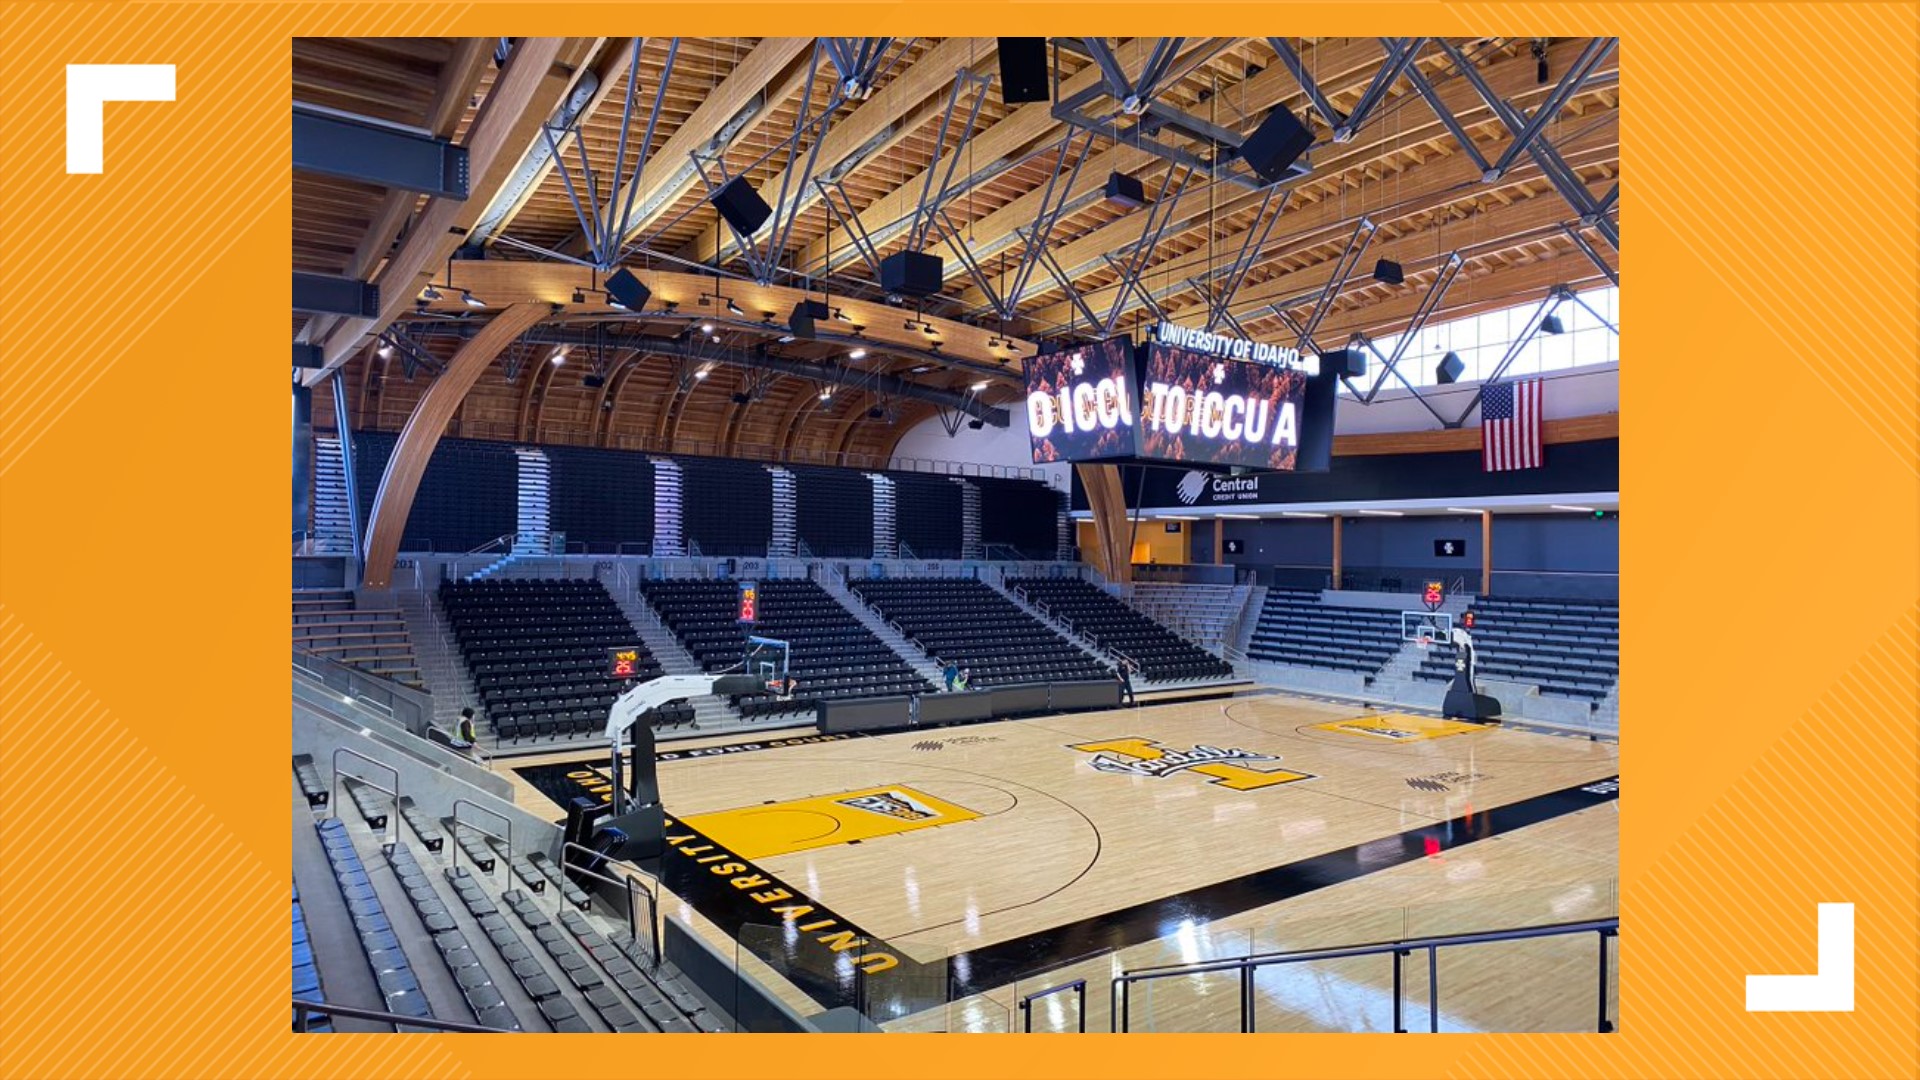 The arena fits 4,000 fans and the first game there will be October 29th against Evergreen State College.